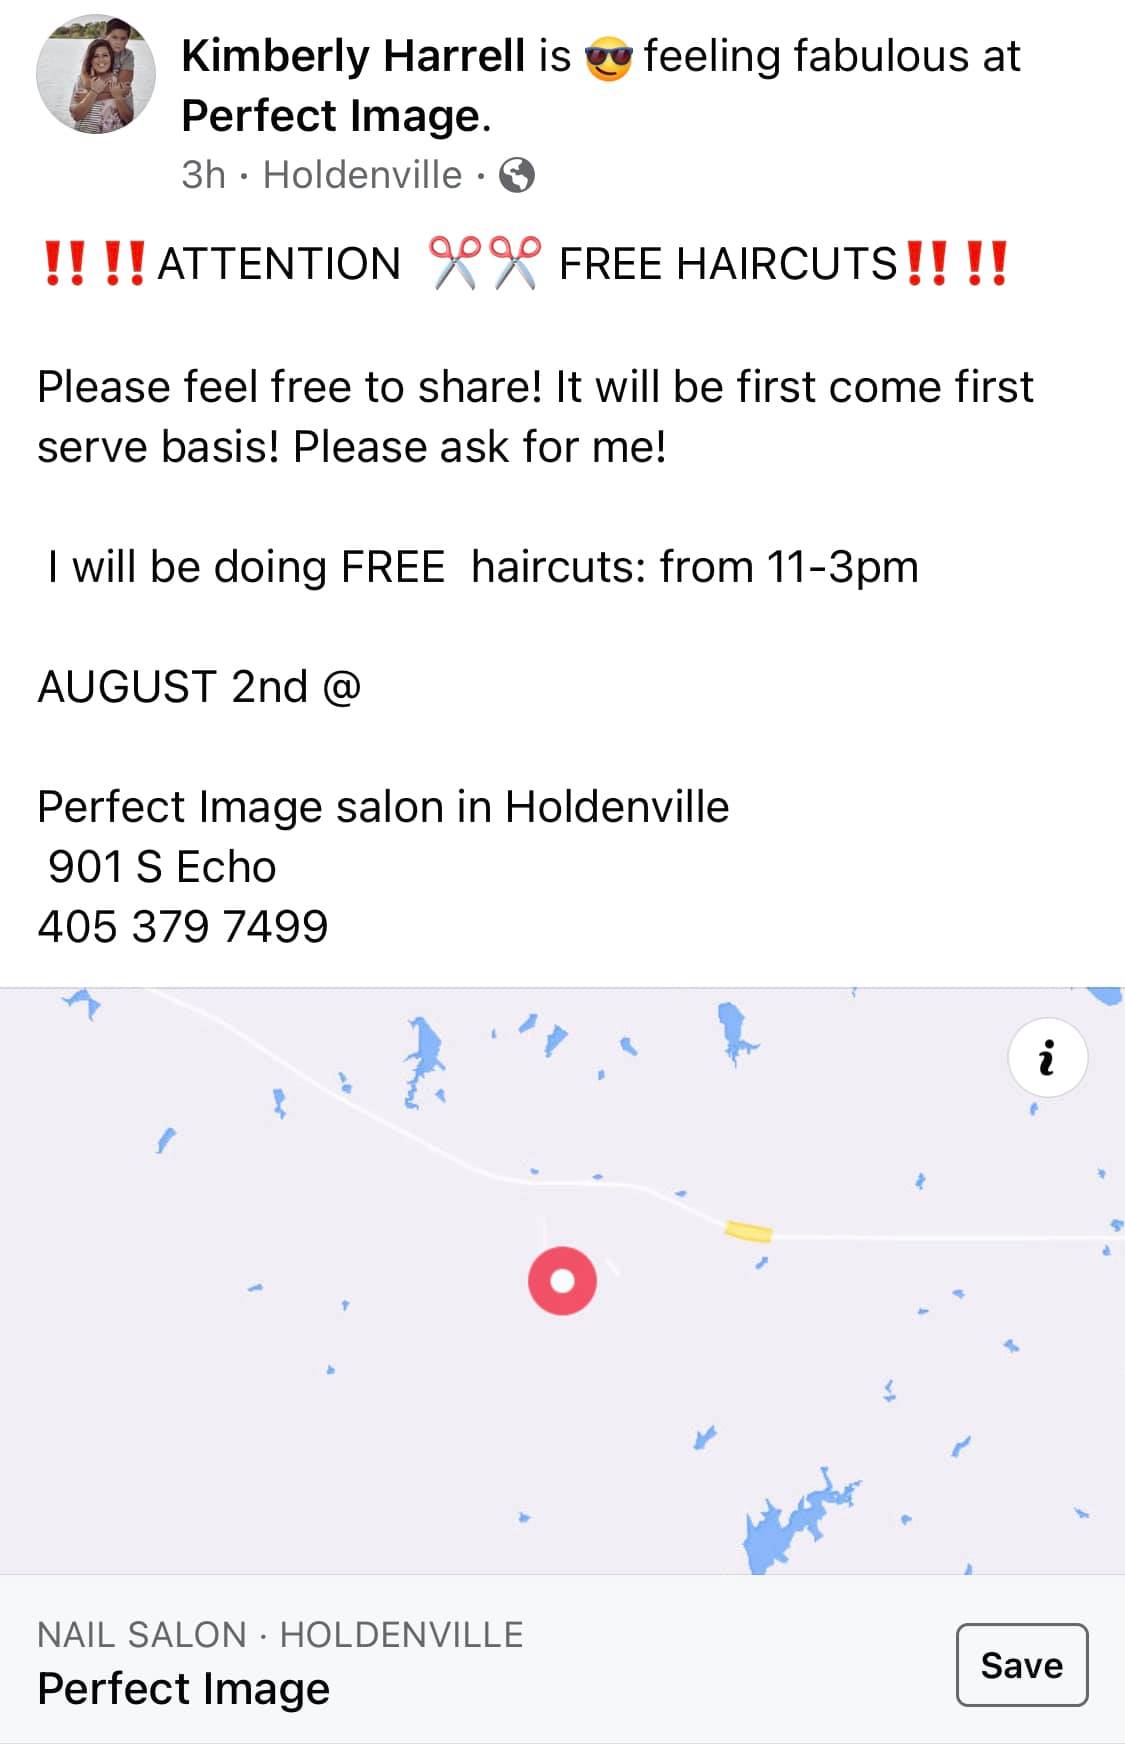 A Perfect Image Salon 901 S Echo St, Holdenville Oklahoma 74848